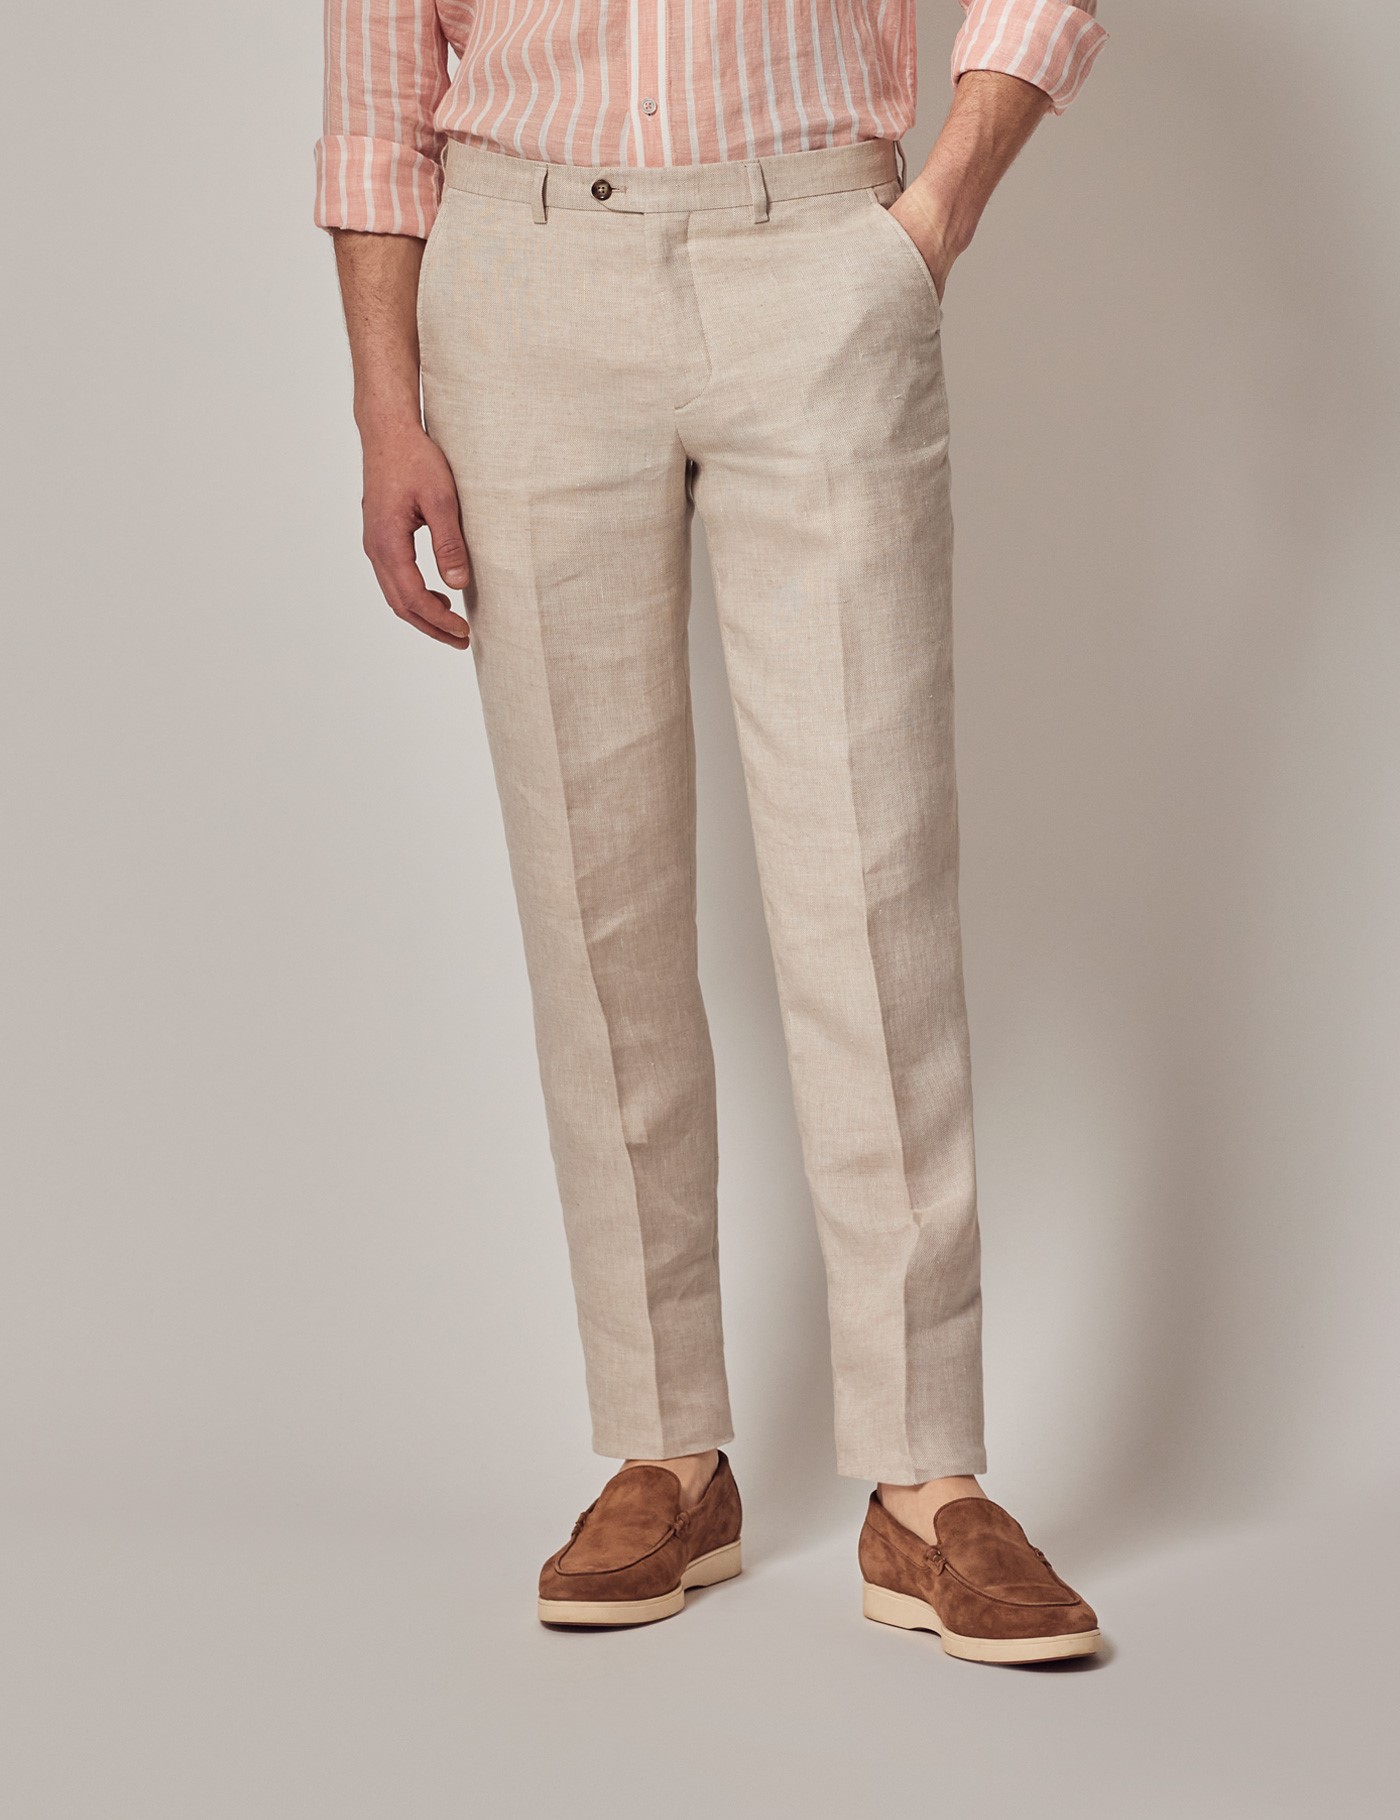 Buy Brown Trousers & Pants for Men by TURTLE Online | Ajio.com-saigonsouth.com.vn